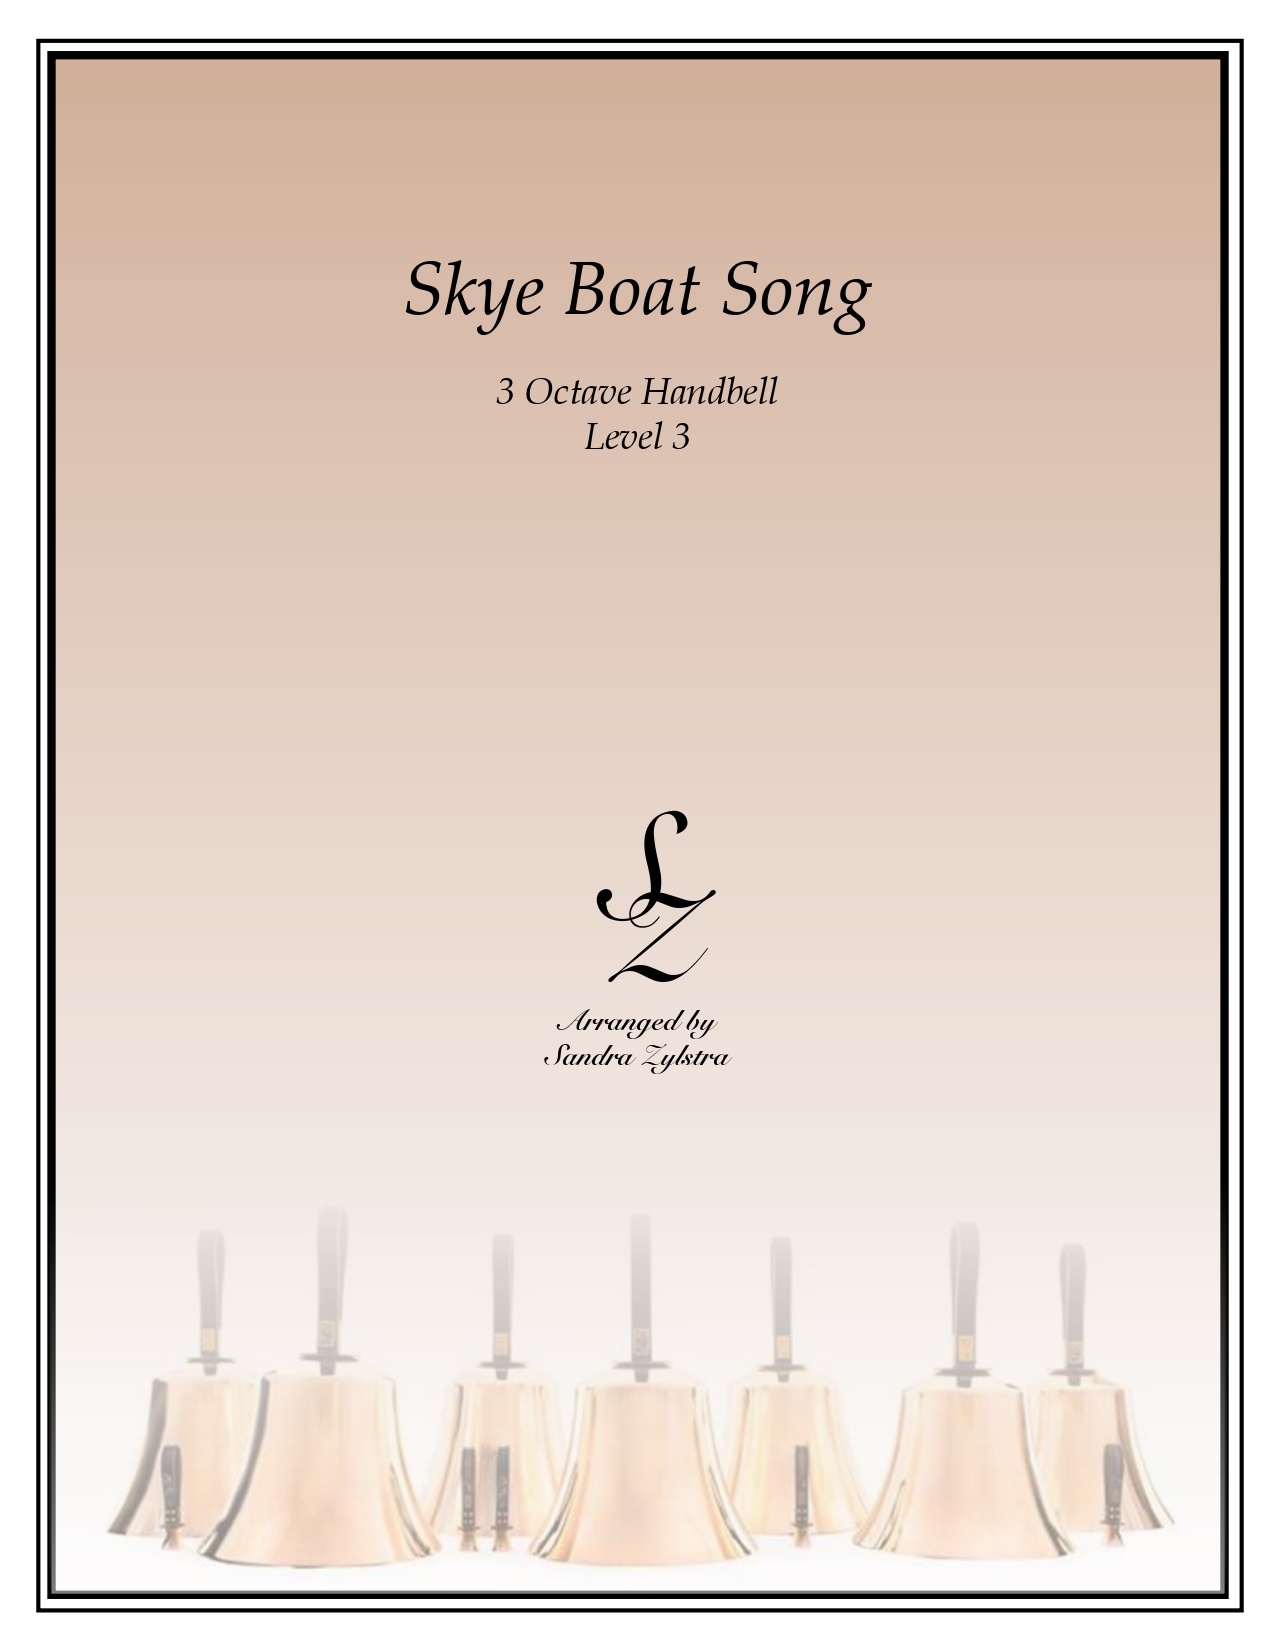 Skye Boat Song 3 octave handbells cover page 00011